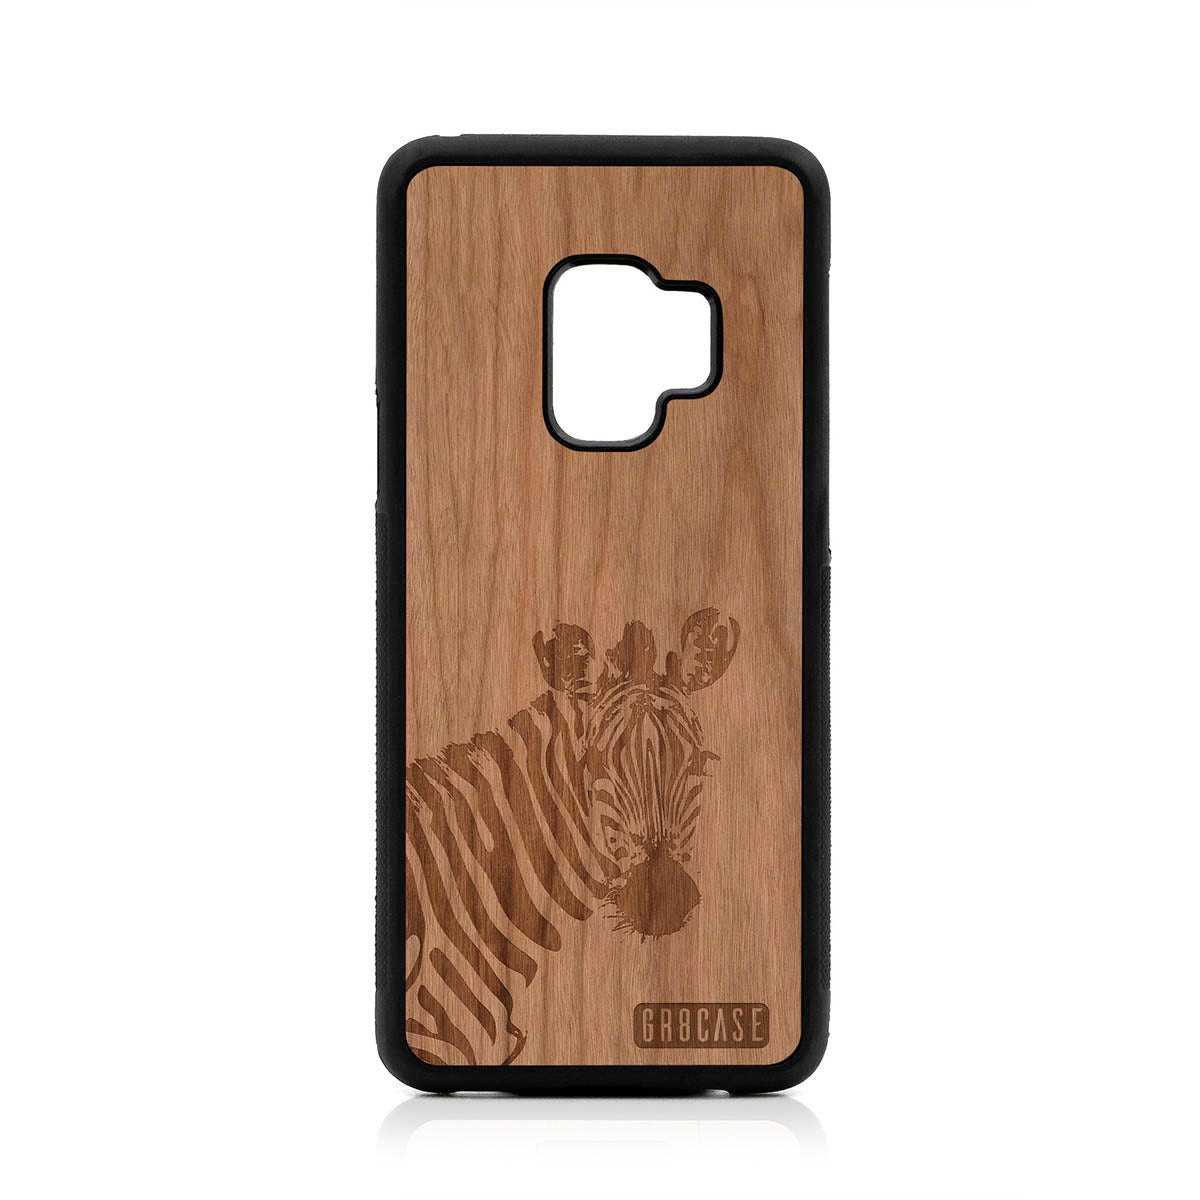 Lookout Zebra Design Wood Case For Samsung Galaxy S9